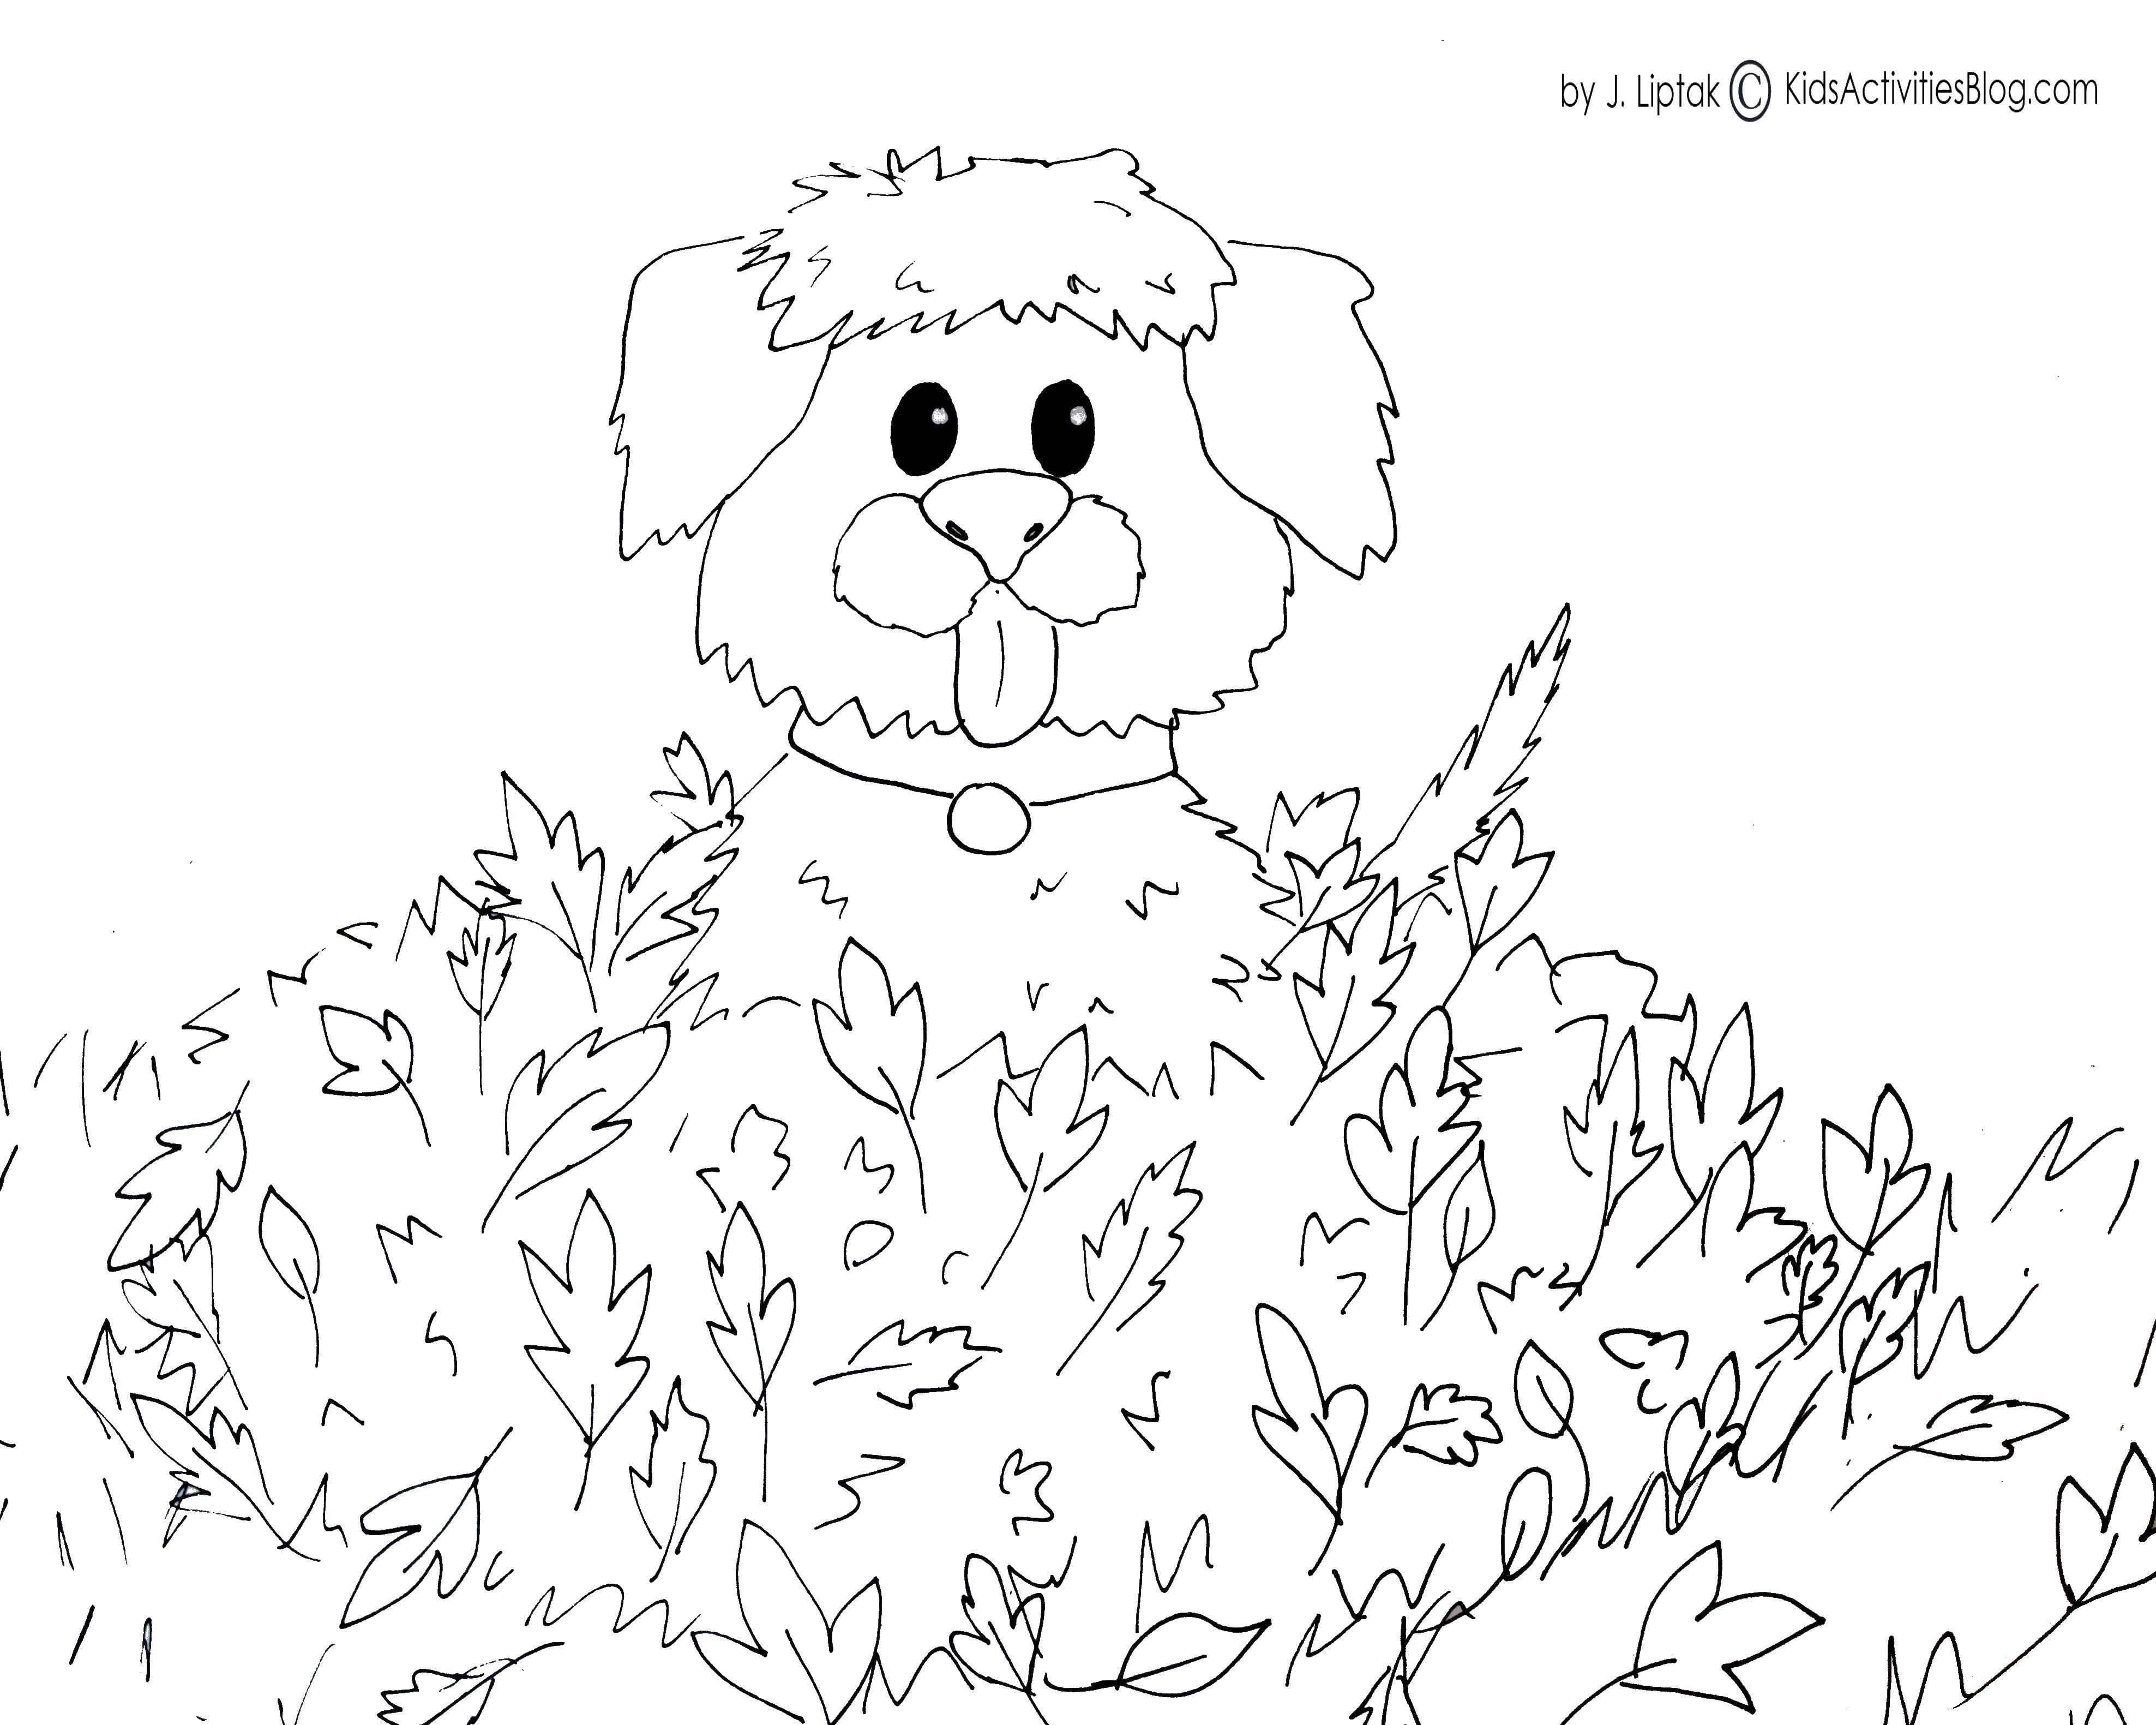 Coloring Dog in a mountain of leaves. Category Autumn. Tags:  autumn, leaves, dog.